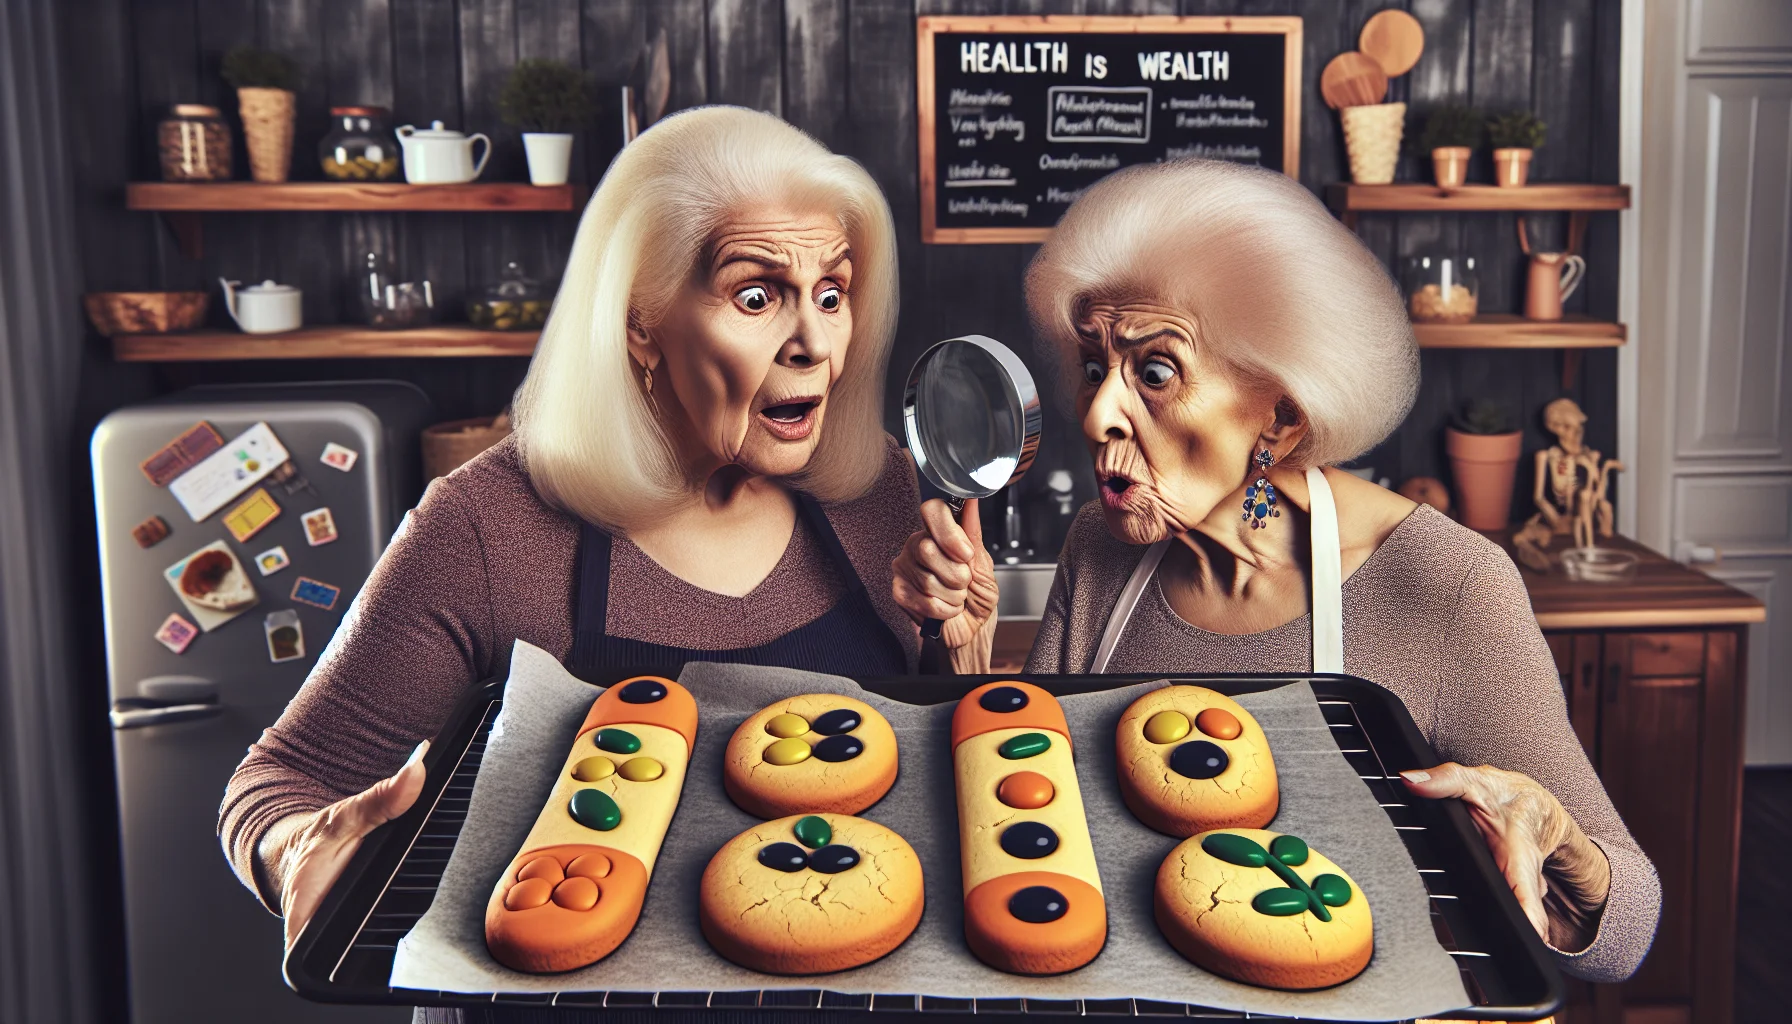 Generate a humorous, realistic image set in a bustling kitchen. An elderly Caucasian woman seems to have just baked giant, multivitamin-shaped cookies, as evidenced by a cooling rack filled with them. Her Hispanic female friend, both in their early 70s, is raising her eyebrows in surprise and amusement while holding a magnifying glass over the unusually shaped treat. On the background, fridge magnets that read 'Health is wealth' and a chalkboard displaying a list of healthy diet items add to the theme. Their expressions exude a playful acknowledgment of the effort to maintain a healthy diet, especially in their golden years.